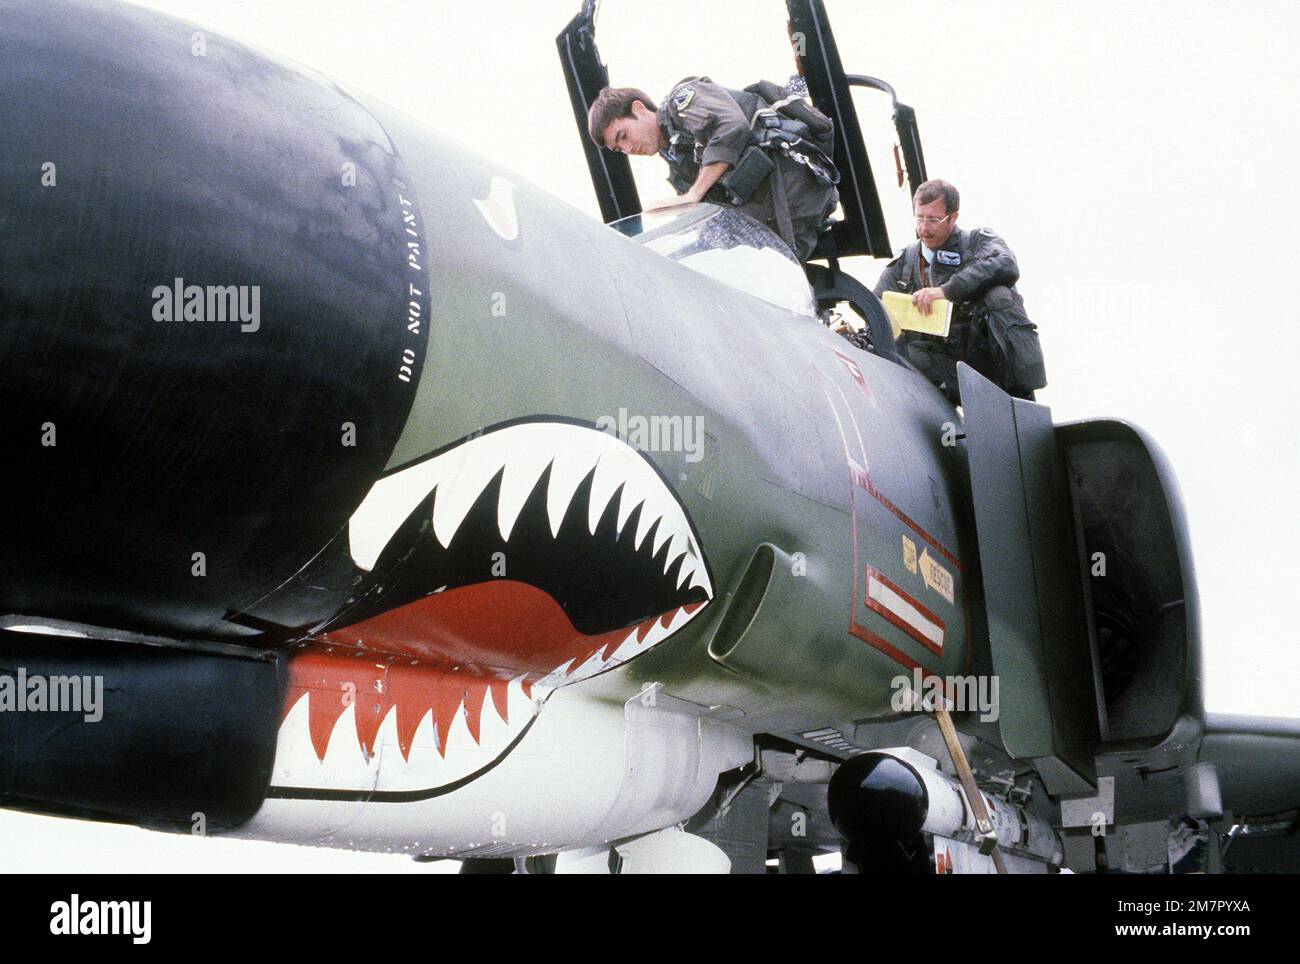 F-4E Phantom II aircraft pilots board their aircraft during exercise Cope North '80. The pilots are assigned to the 3rd Tactical Fighter Wing. Subject Operation/Series: COPE NORTH '80 Base: Naval Air Facility, Misawa State: Aomori Country: Japan (JPN) Stock Photo